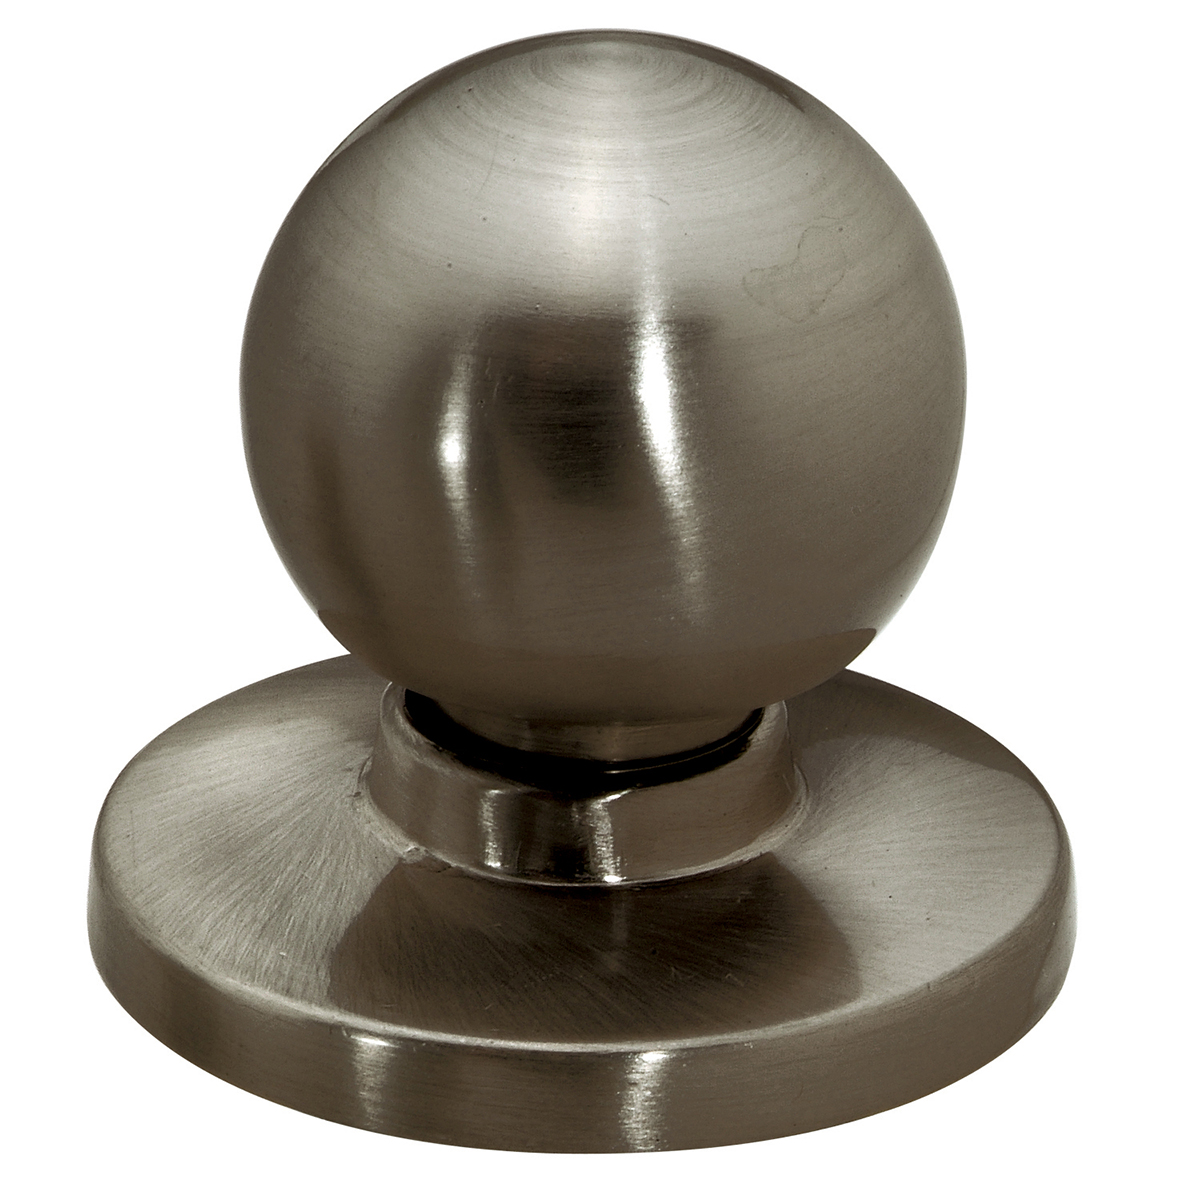 Cabinet Knobs - Pedestal Knob with Removable Backplate - Pedestal Knob with Removable Backplate - Antique Nickel